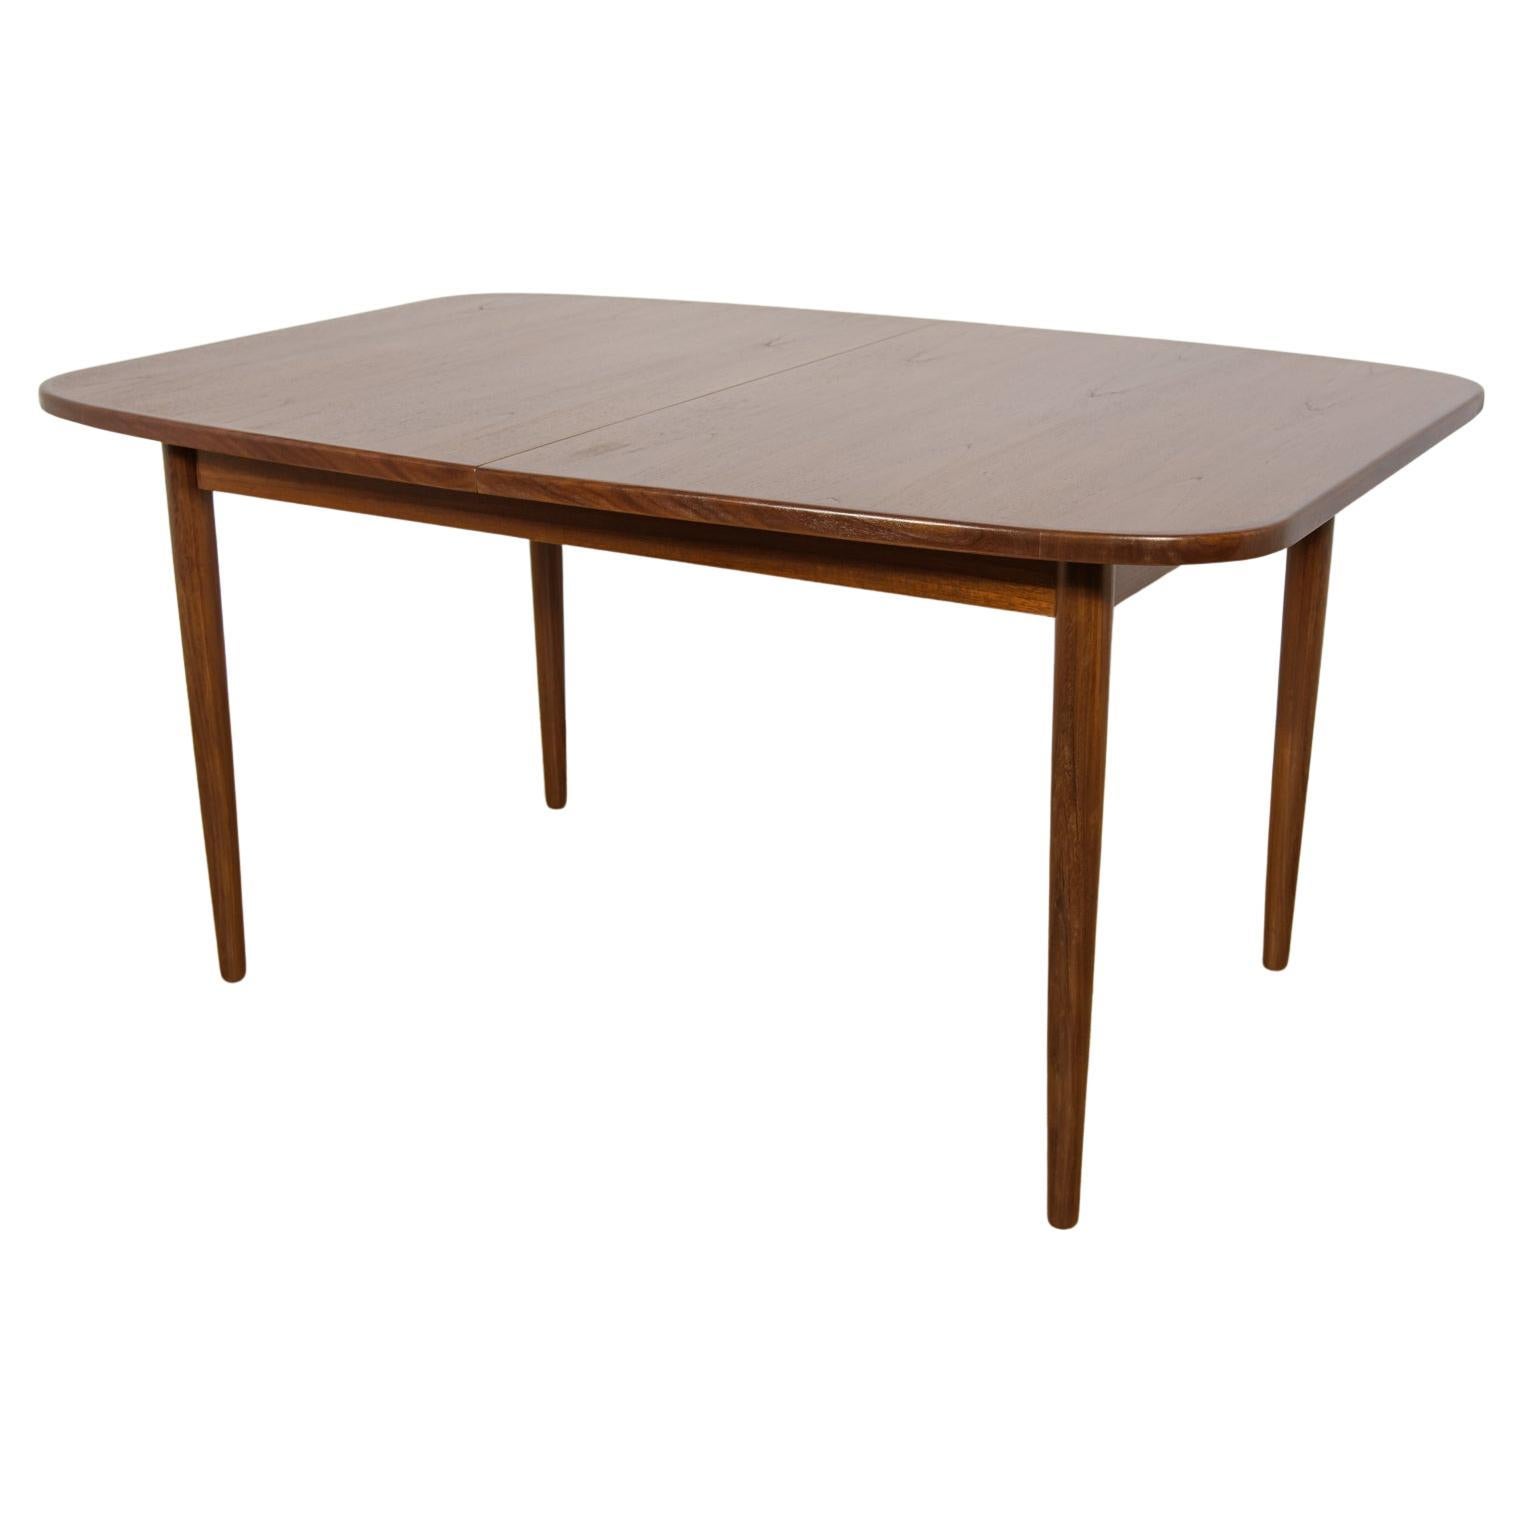 Mid-Century Teak Extendable Dining Table from G-Plan, United Knigdom, 1960s